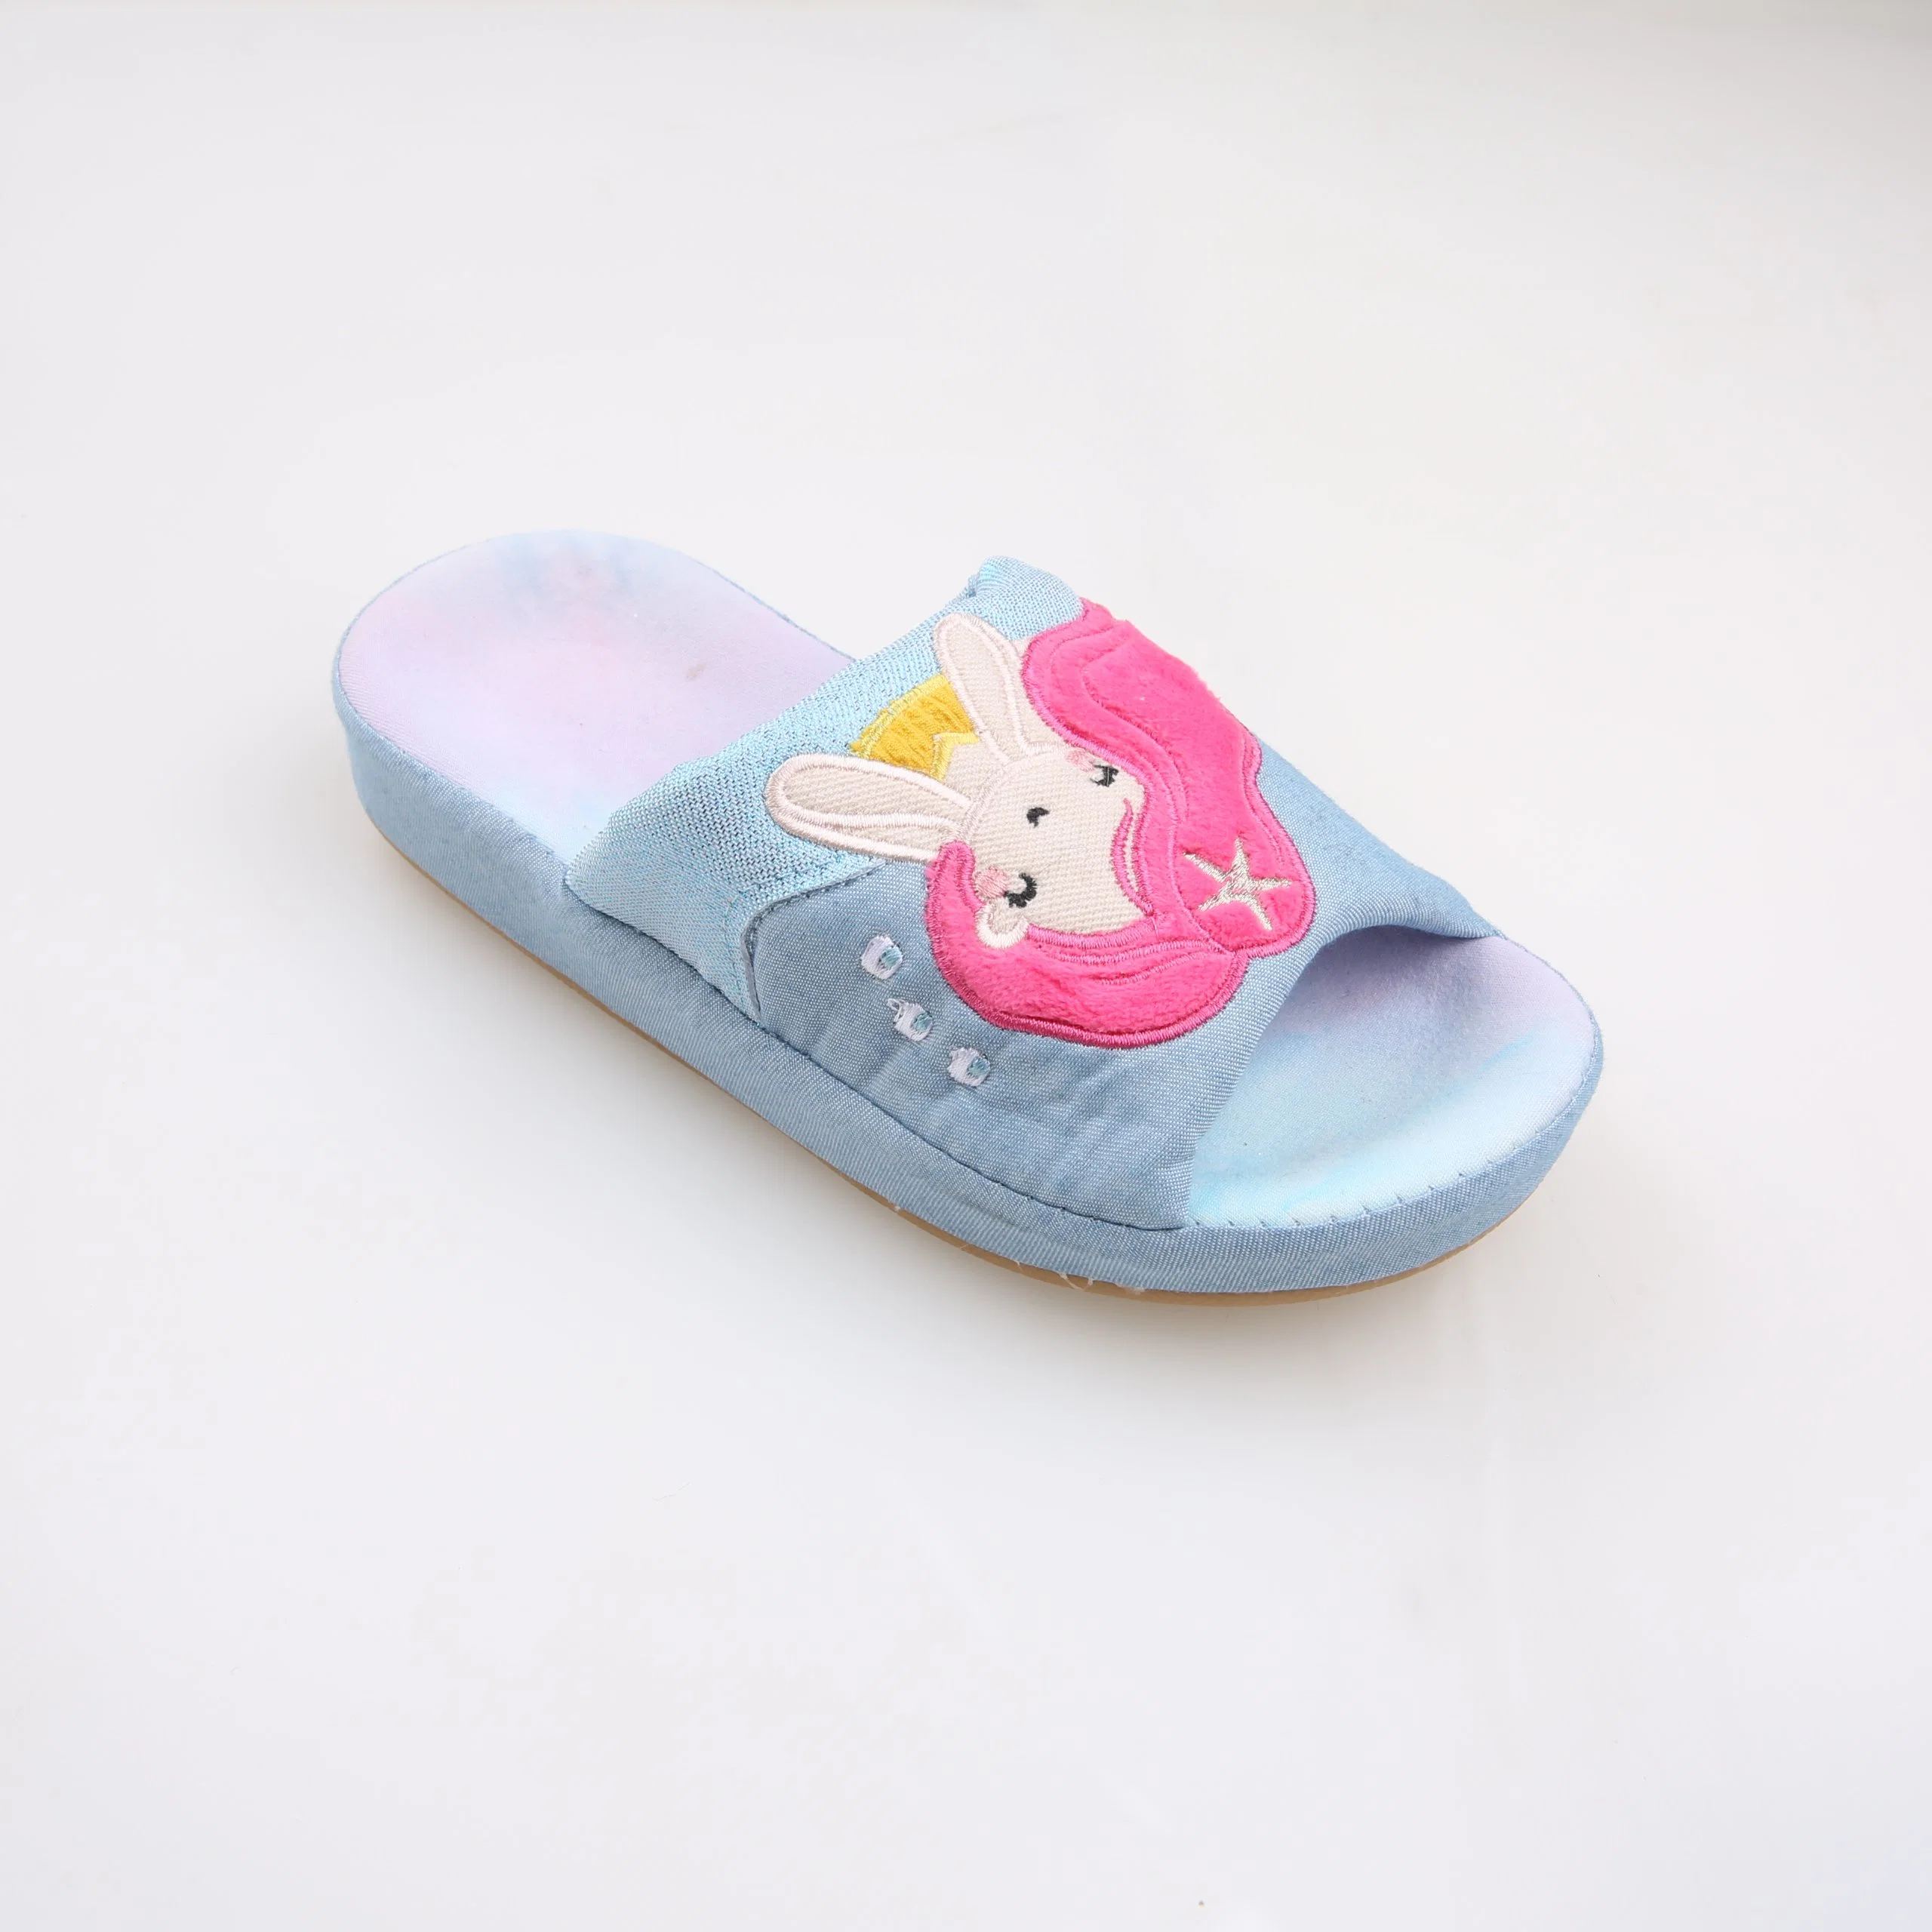 Corifei 3D Cute Mermaid Embroider Textile and TPR Kids Indoor Slipper